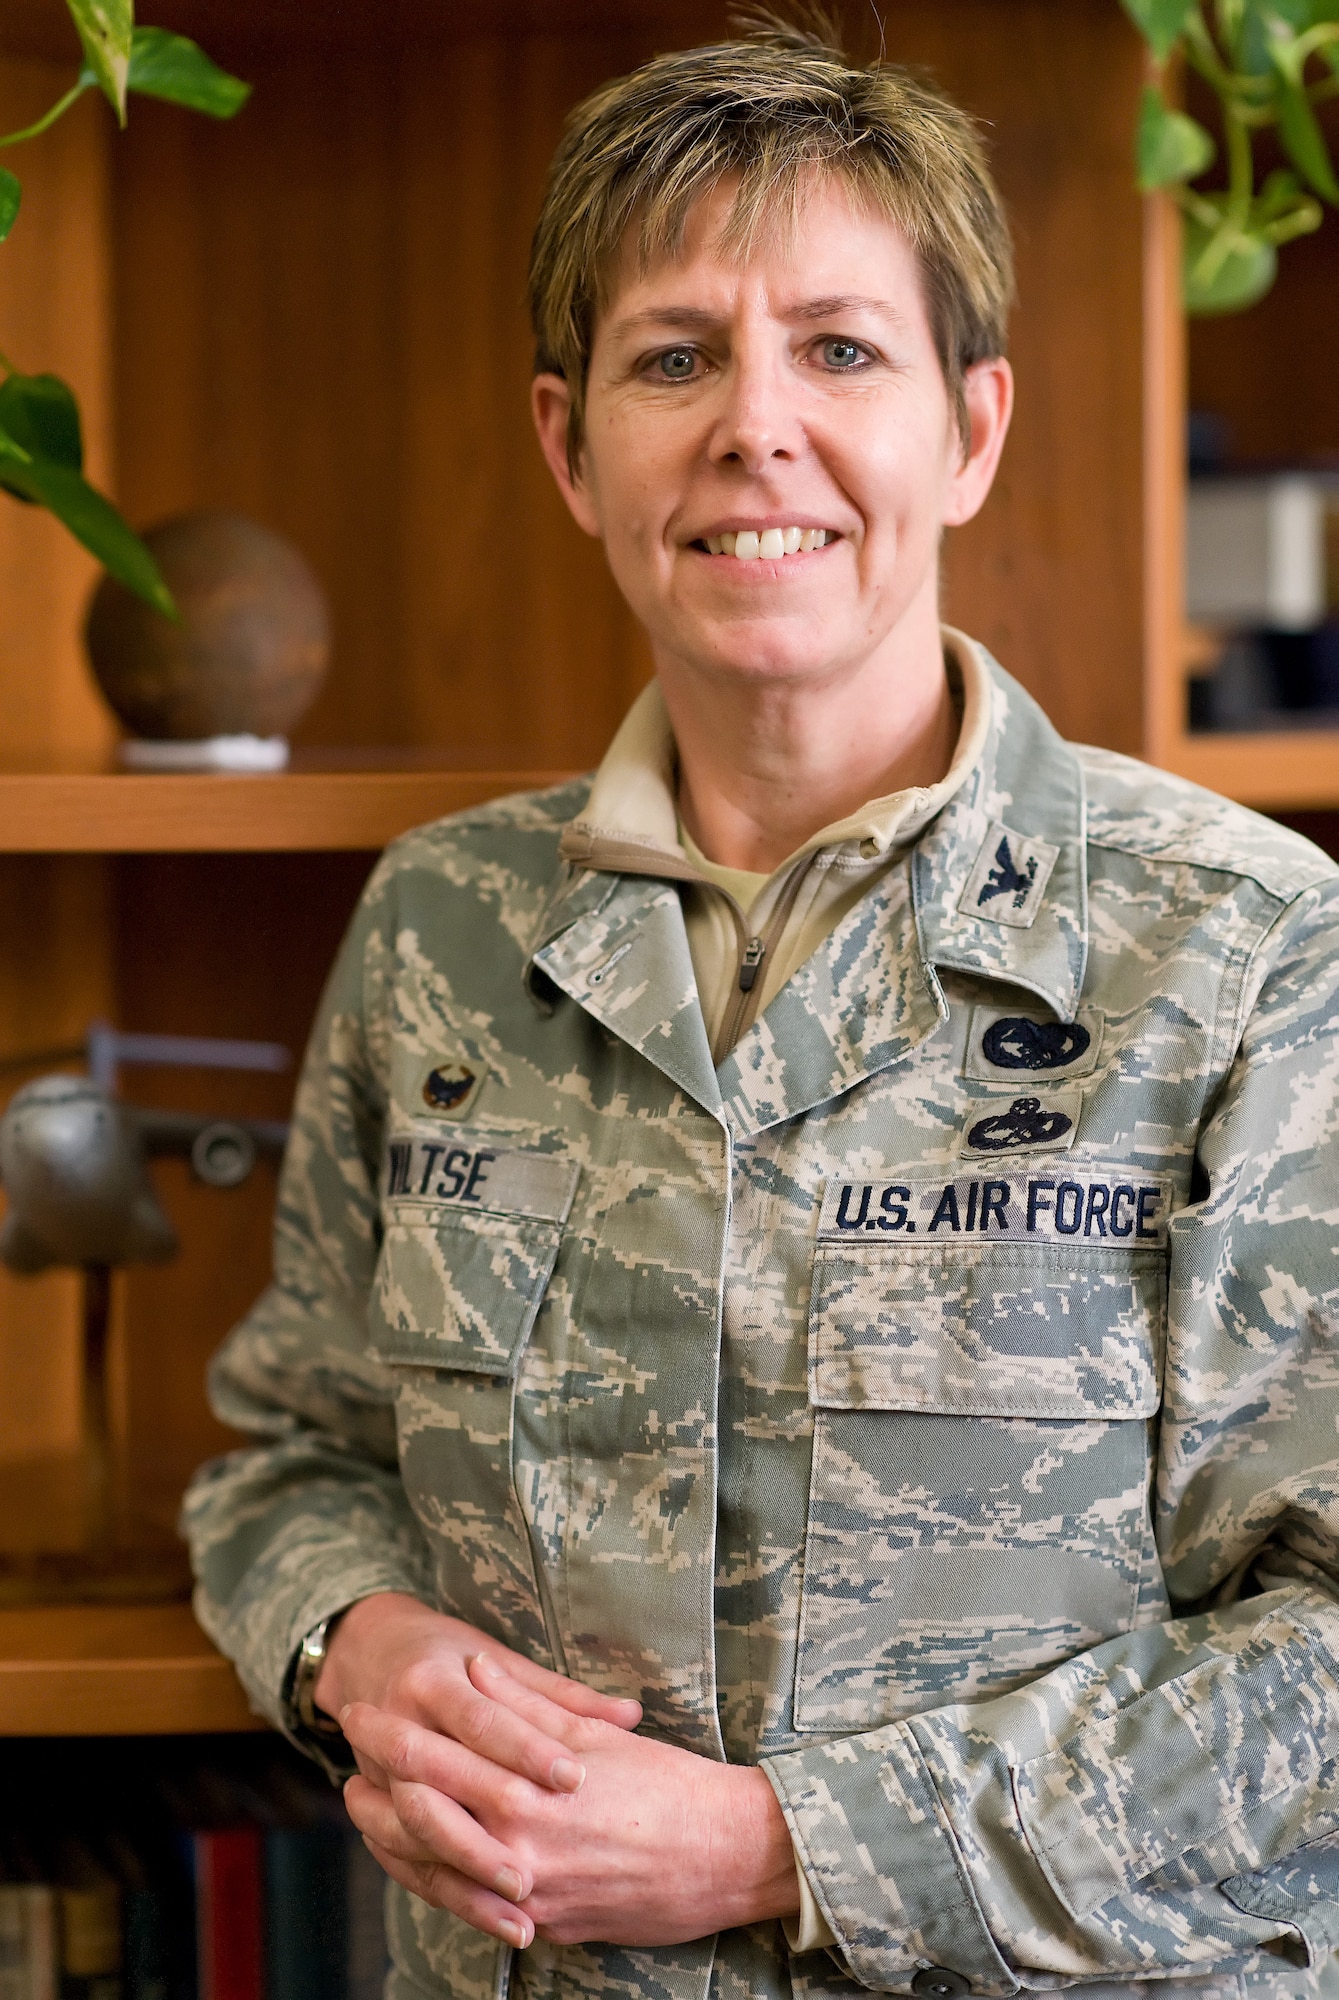 Col. Gretchen Wiltse, 512th Mission Support Group commander, 512th Airlift Wing, an associate Air Force Reserve Command unit, takes a moment for a photo outside her office Feb. 26, 2015, on Dover Air Force Base, Del. Wiltse is the senior officer responsible for the 800-person organization, which supports Air Mobility Command's worldwide airlift mission, operating C-5 and C-17 aircraft. (U.S. Air Force photo/Roland Balik)